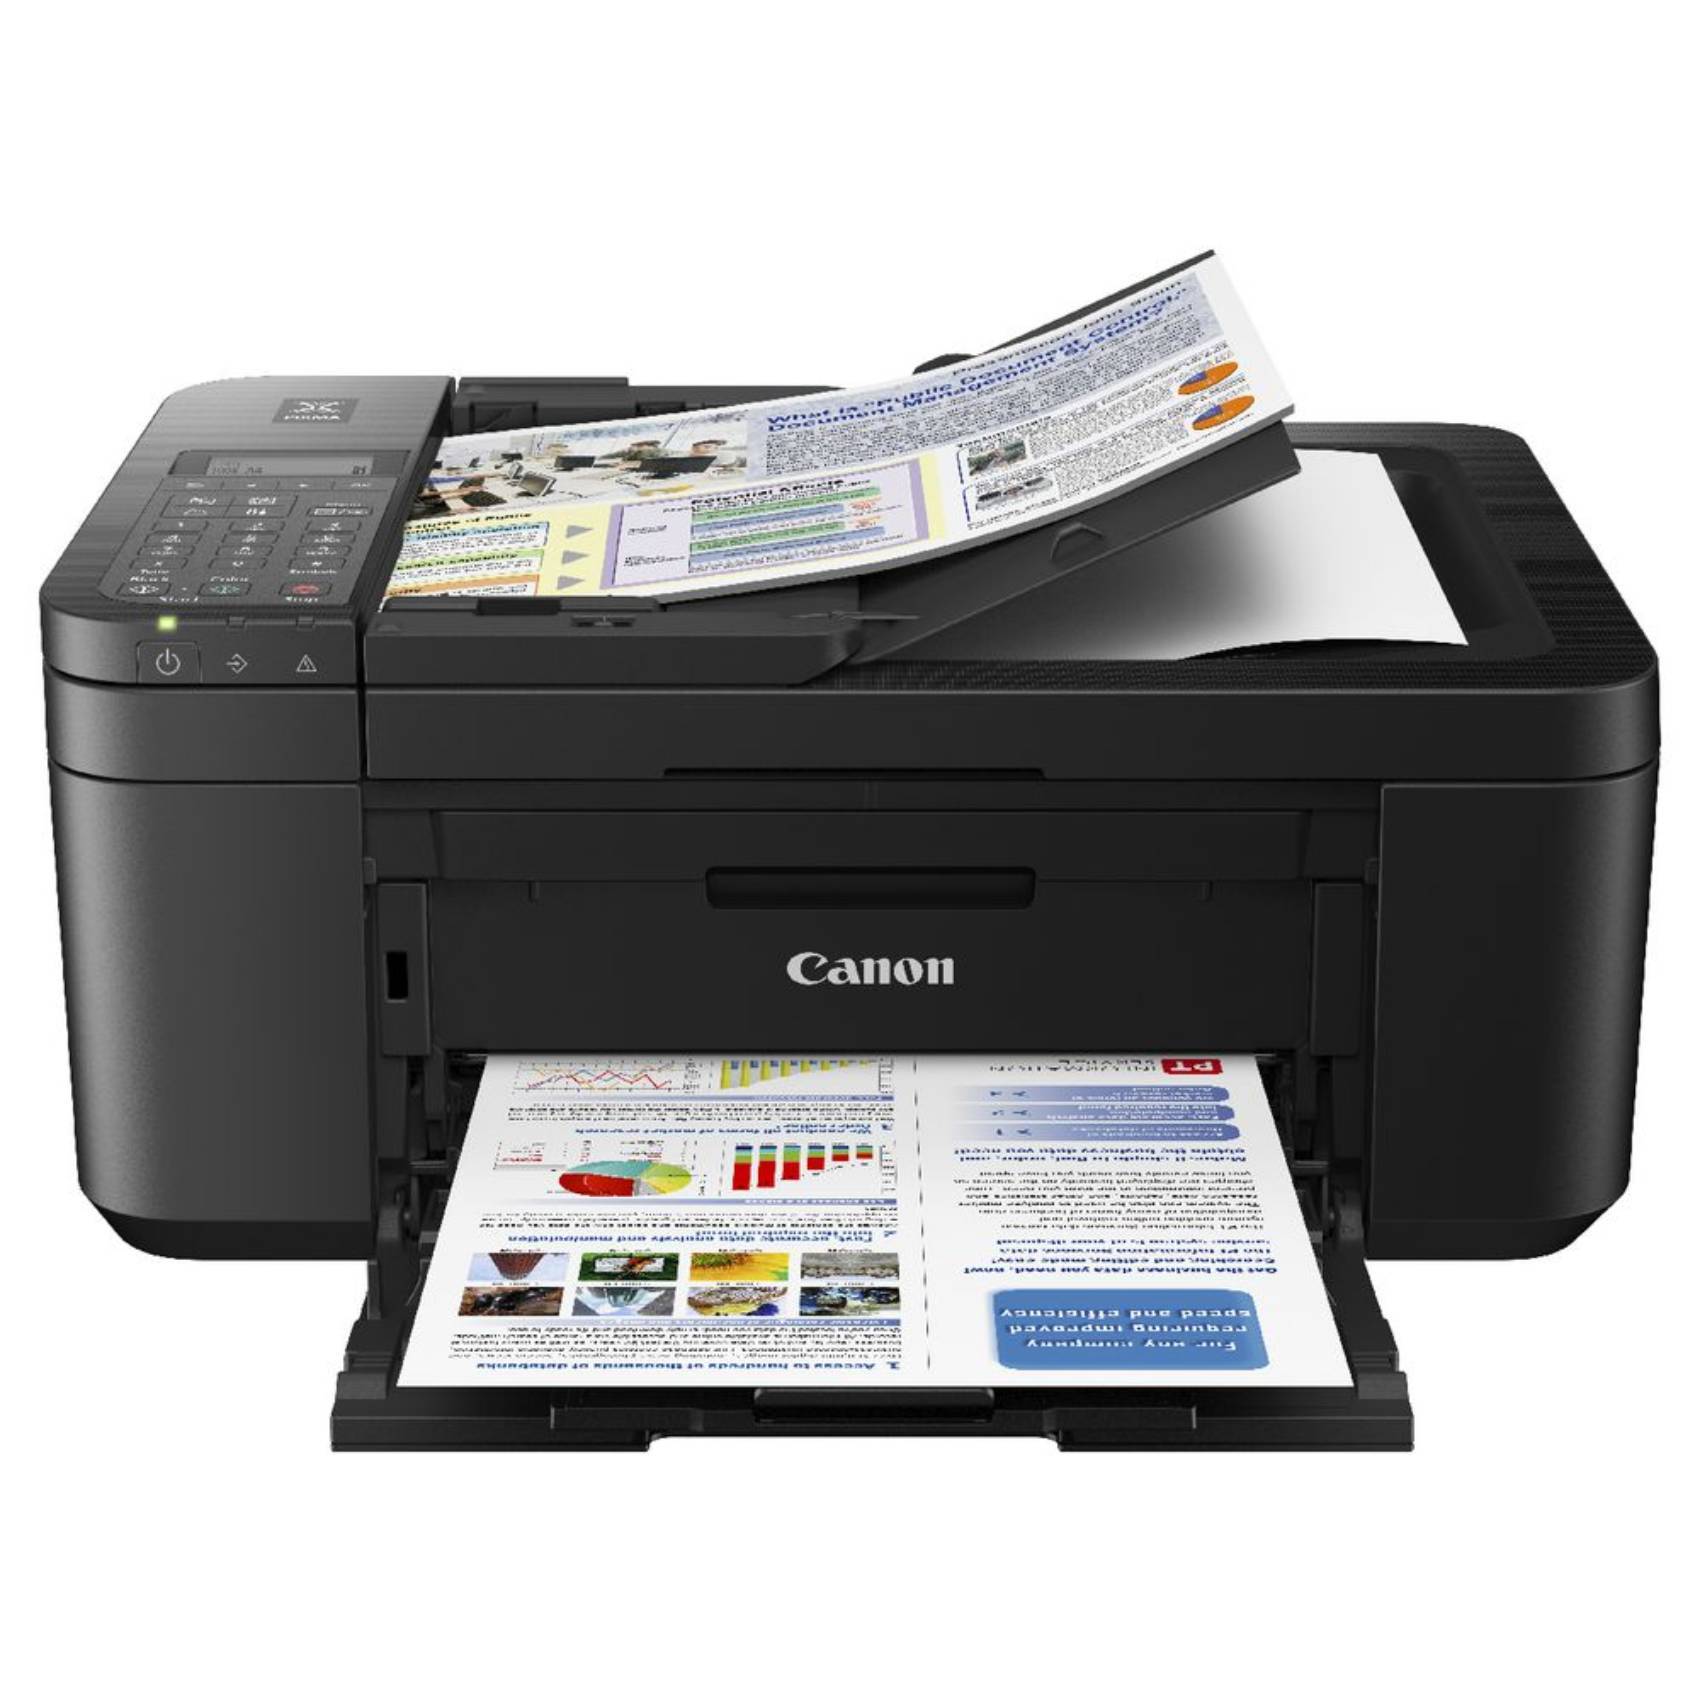 Buy Canon All In One Wi Fi Printer Tr4540 Online Shop Electronics Appliances On Carrefour Uae